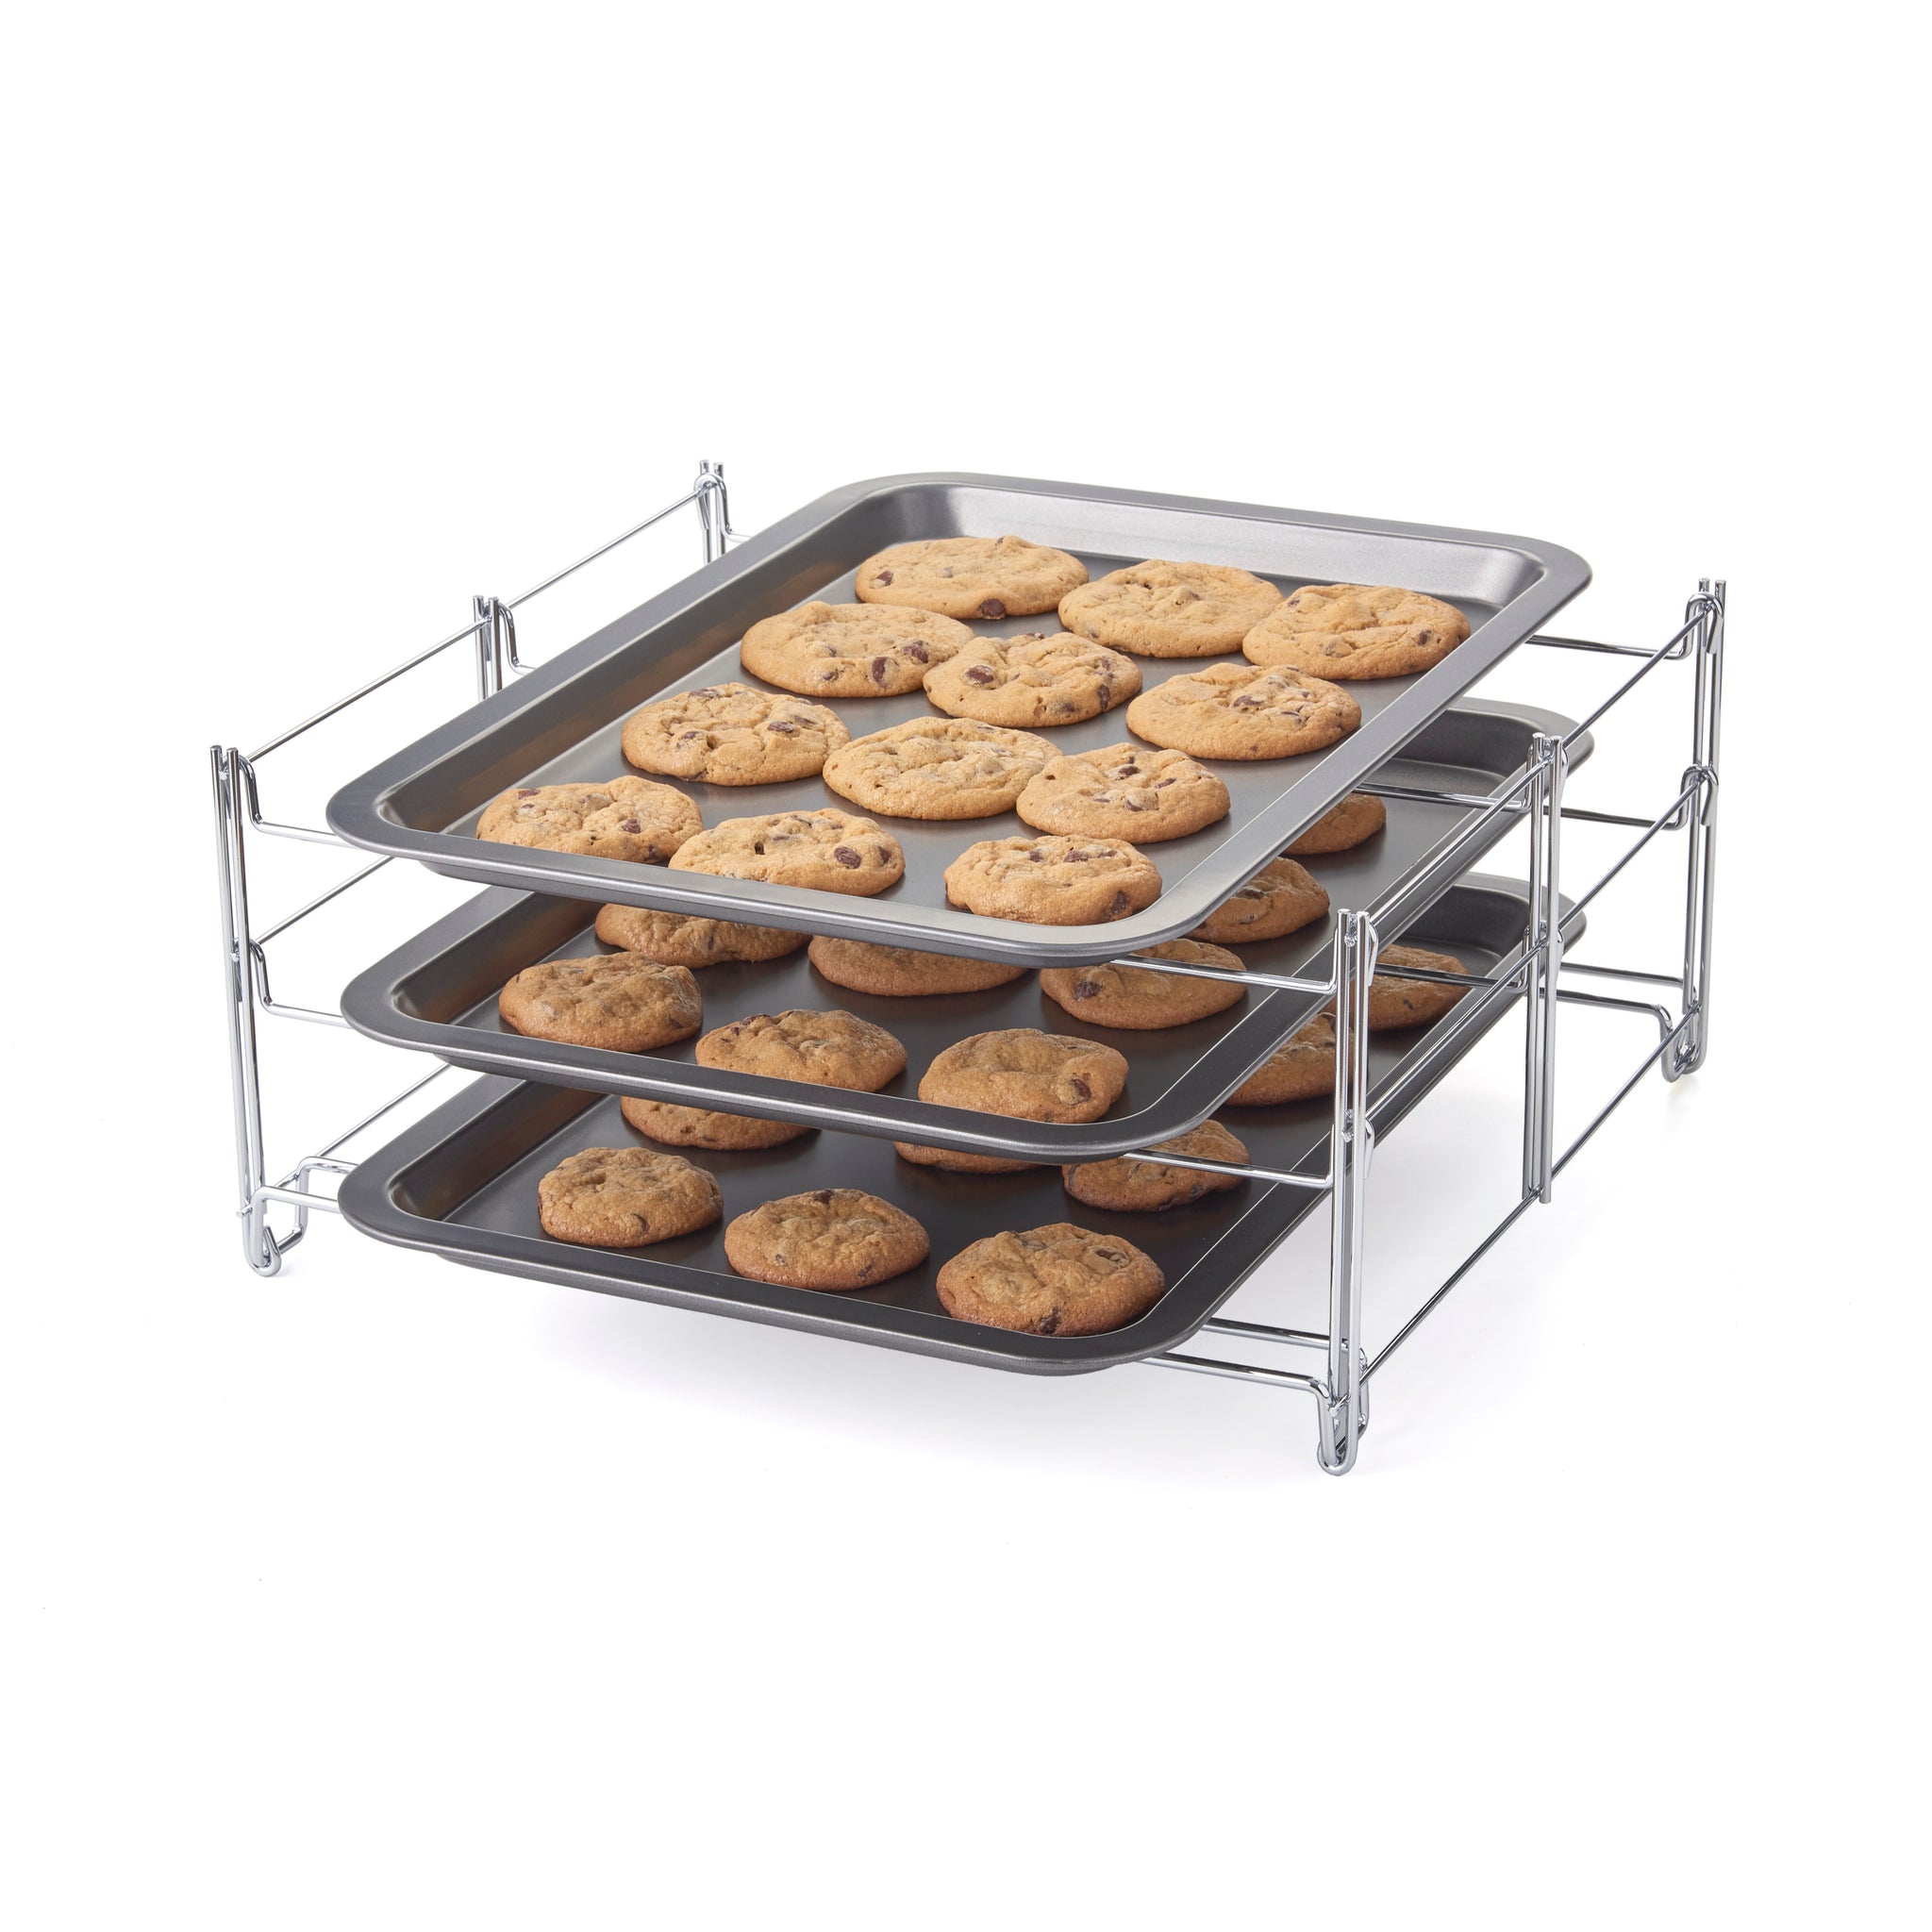 3 Tier Baking Rack with 3 Non-Stick Cookie Sheets – Nifty Home Products